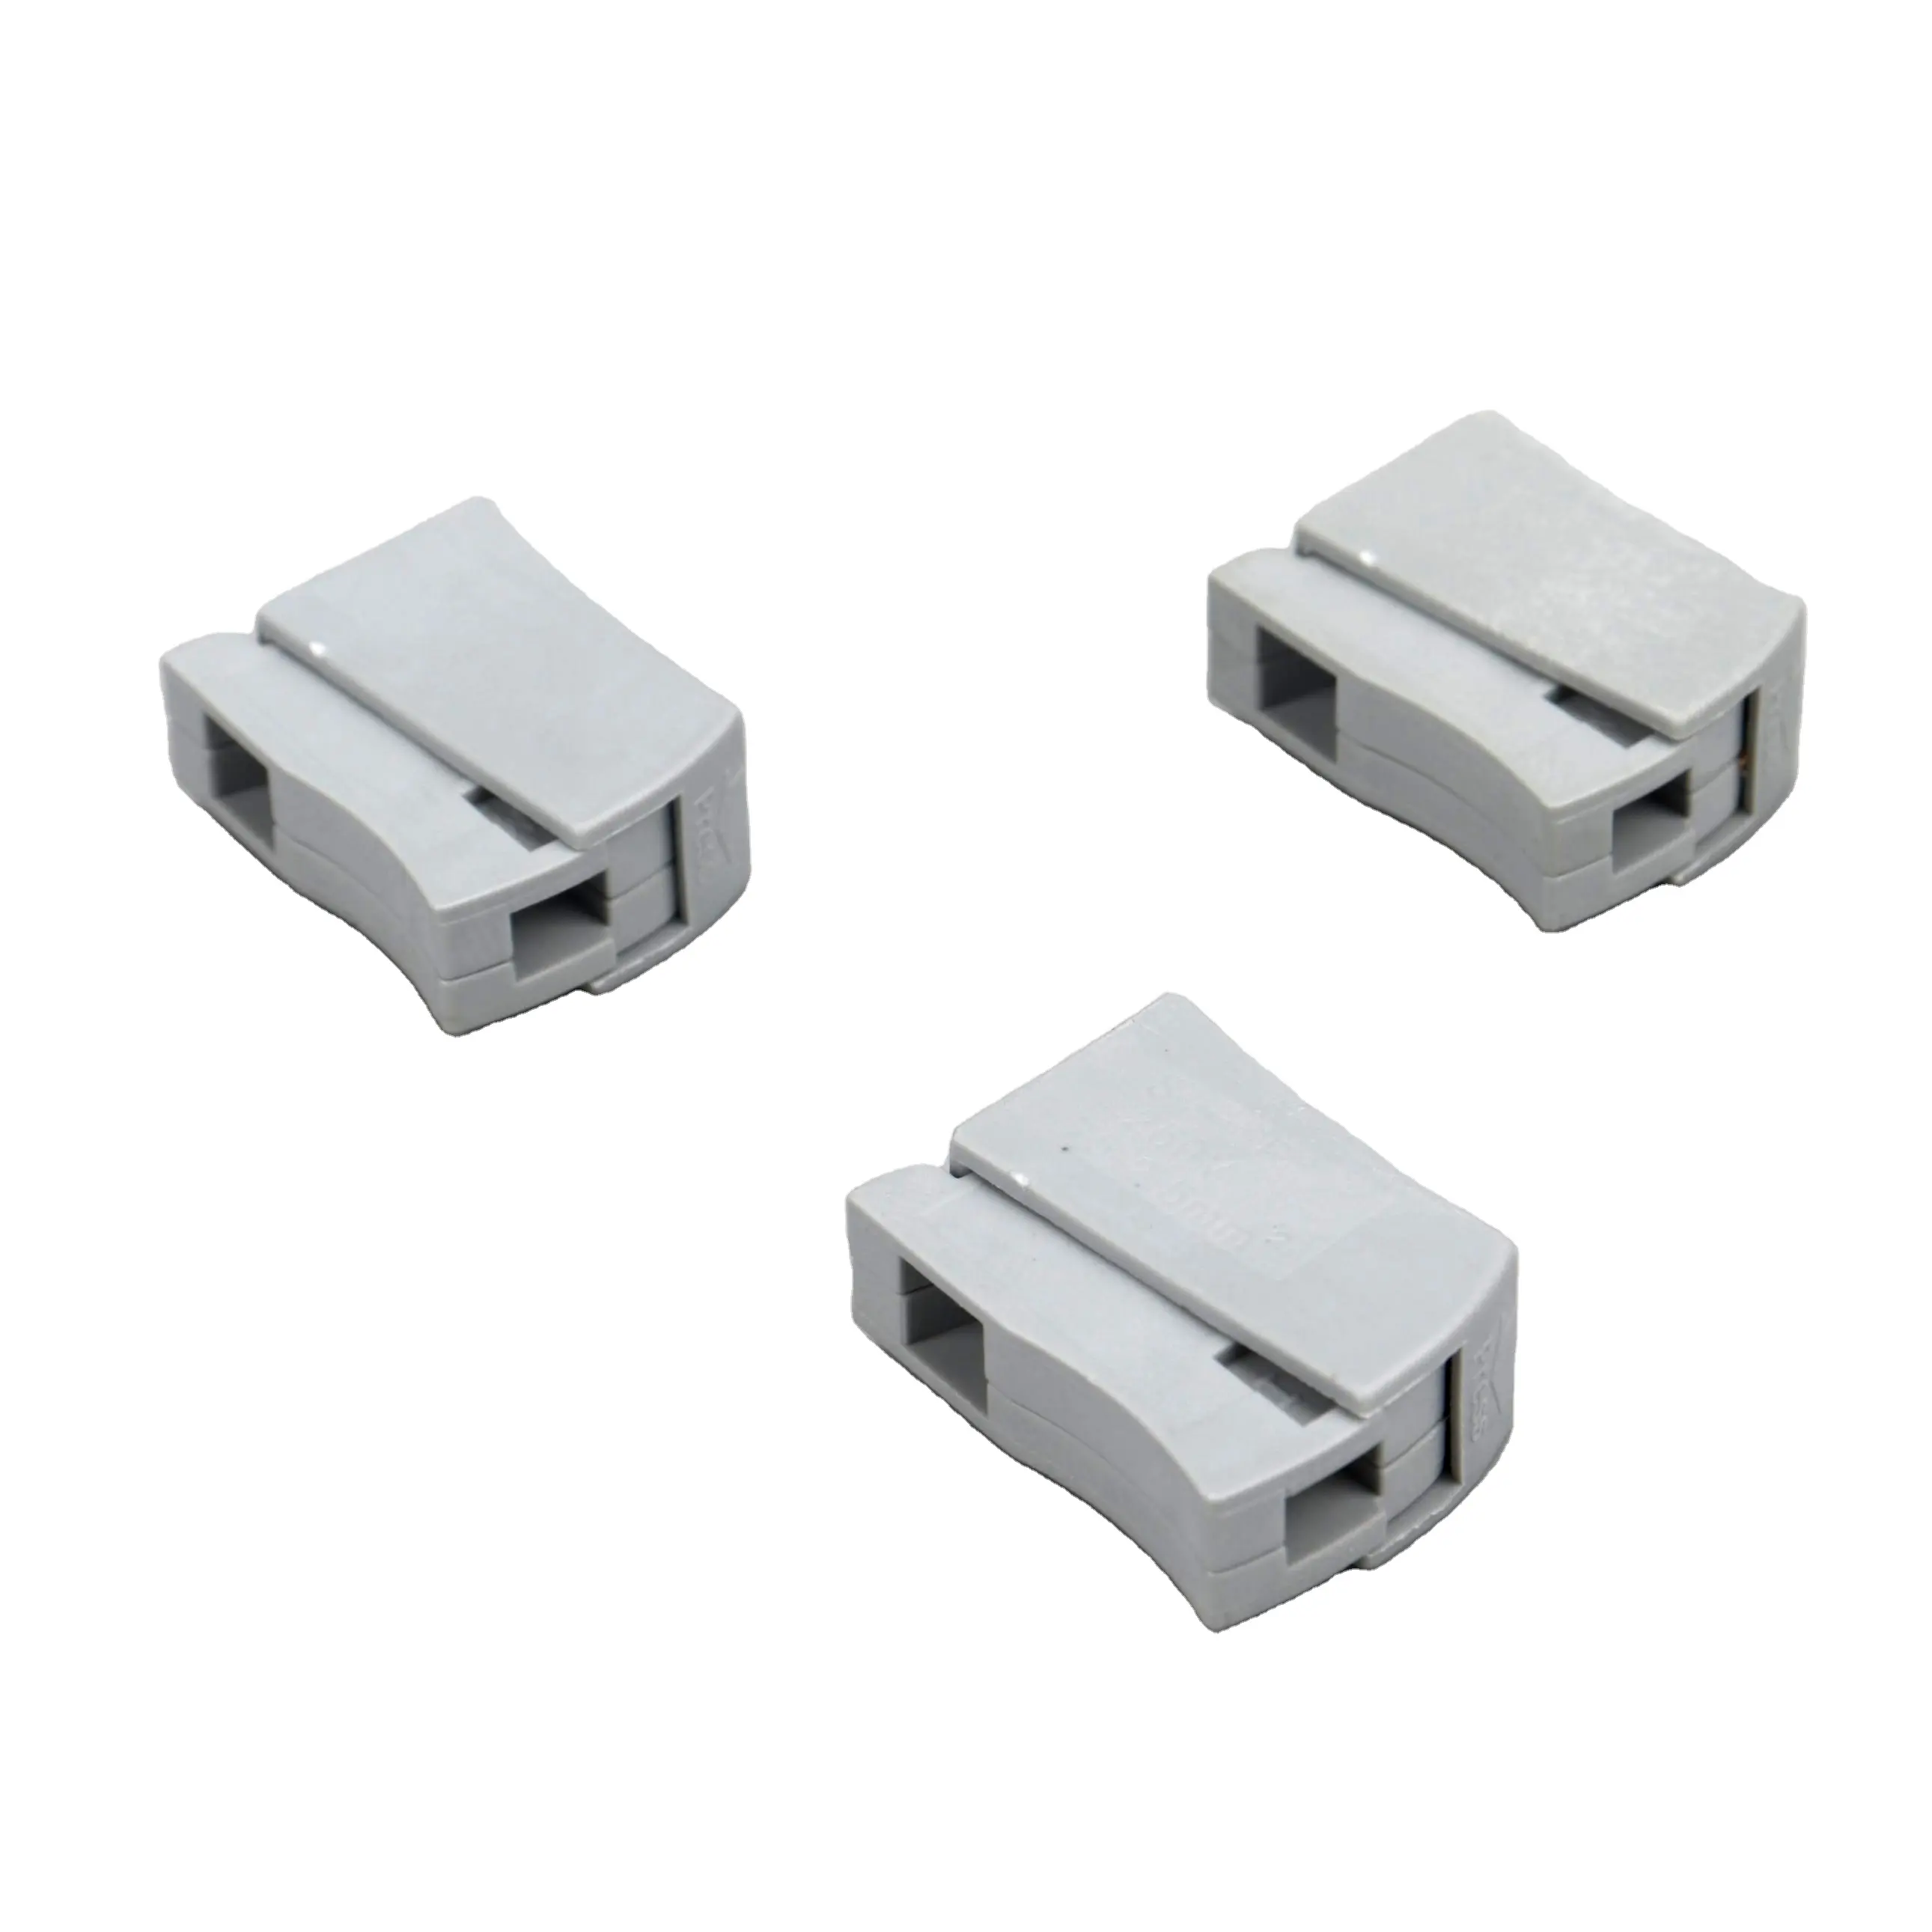 224-101 Replace Lighting Connectors Terminal Block For 0.5-2.5mm2 Wire Connection